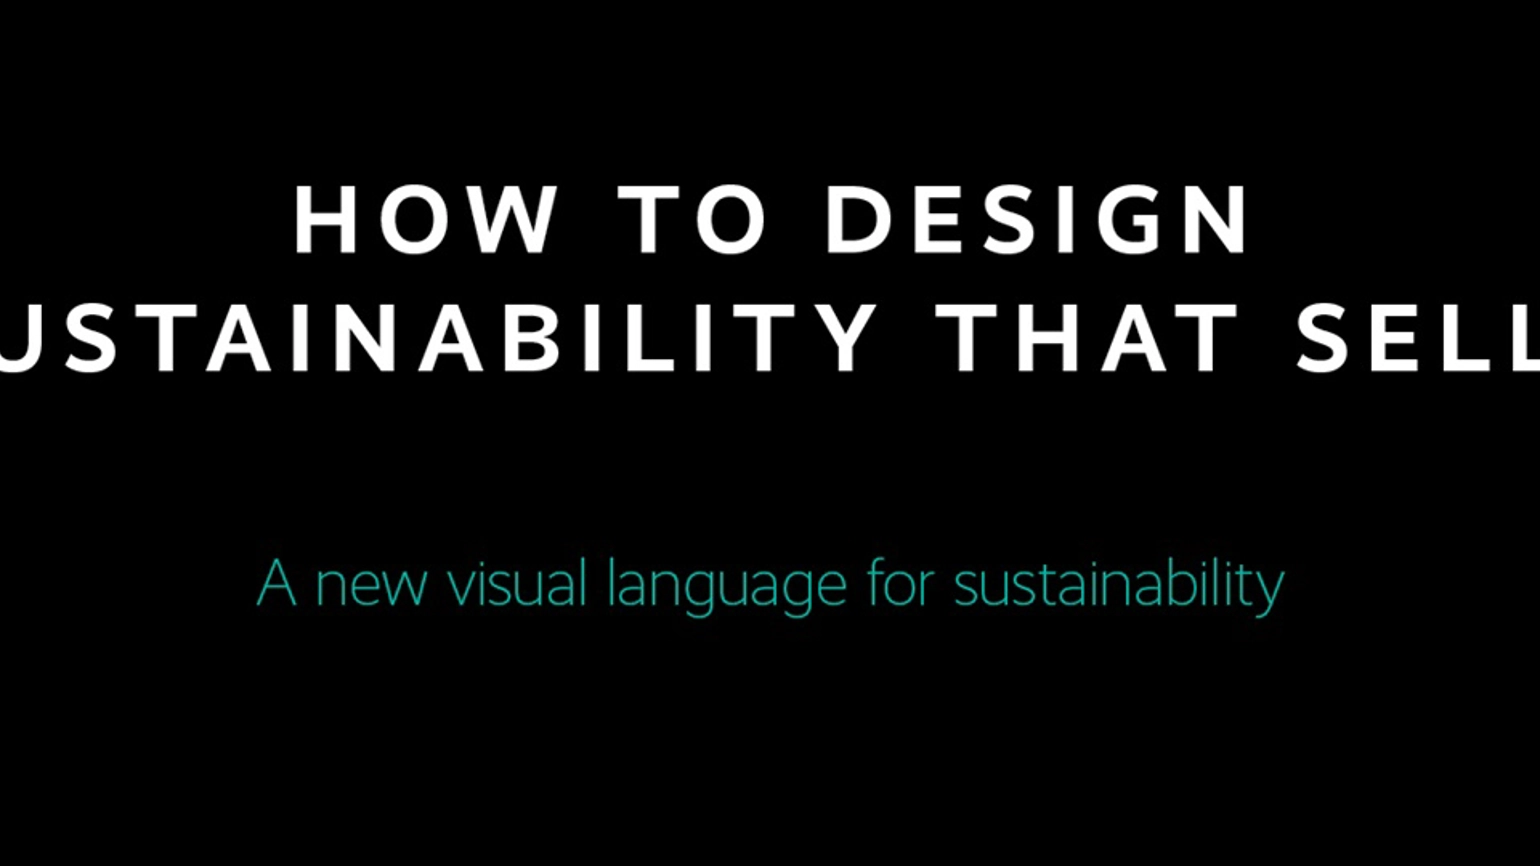 Black background image with the words How to Design Sustainability that Sells